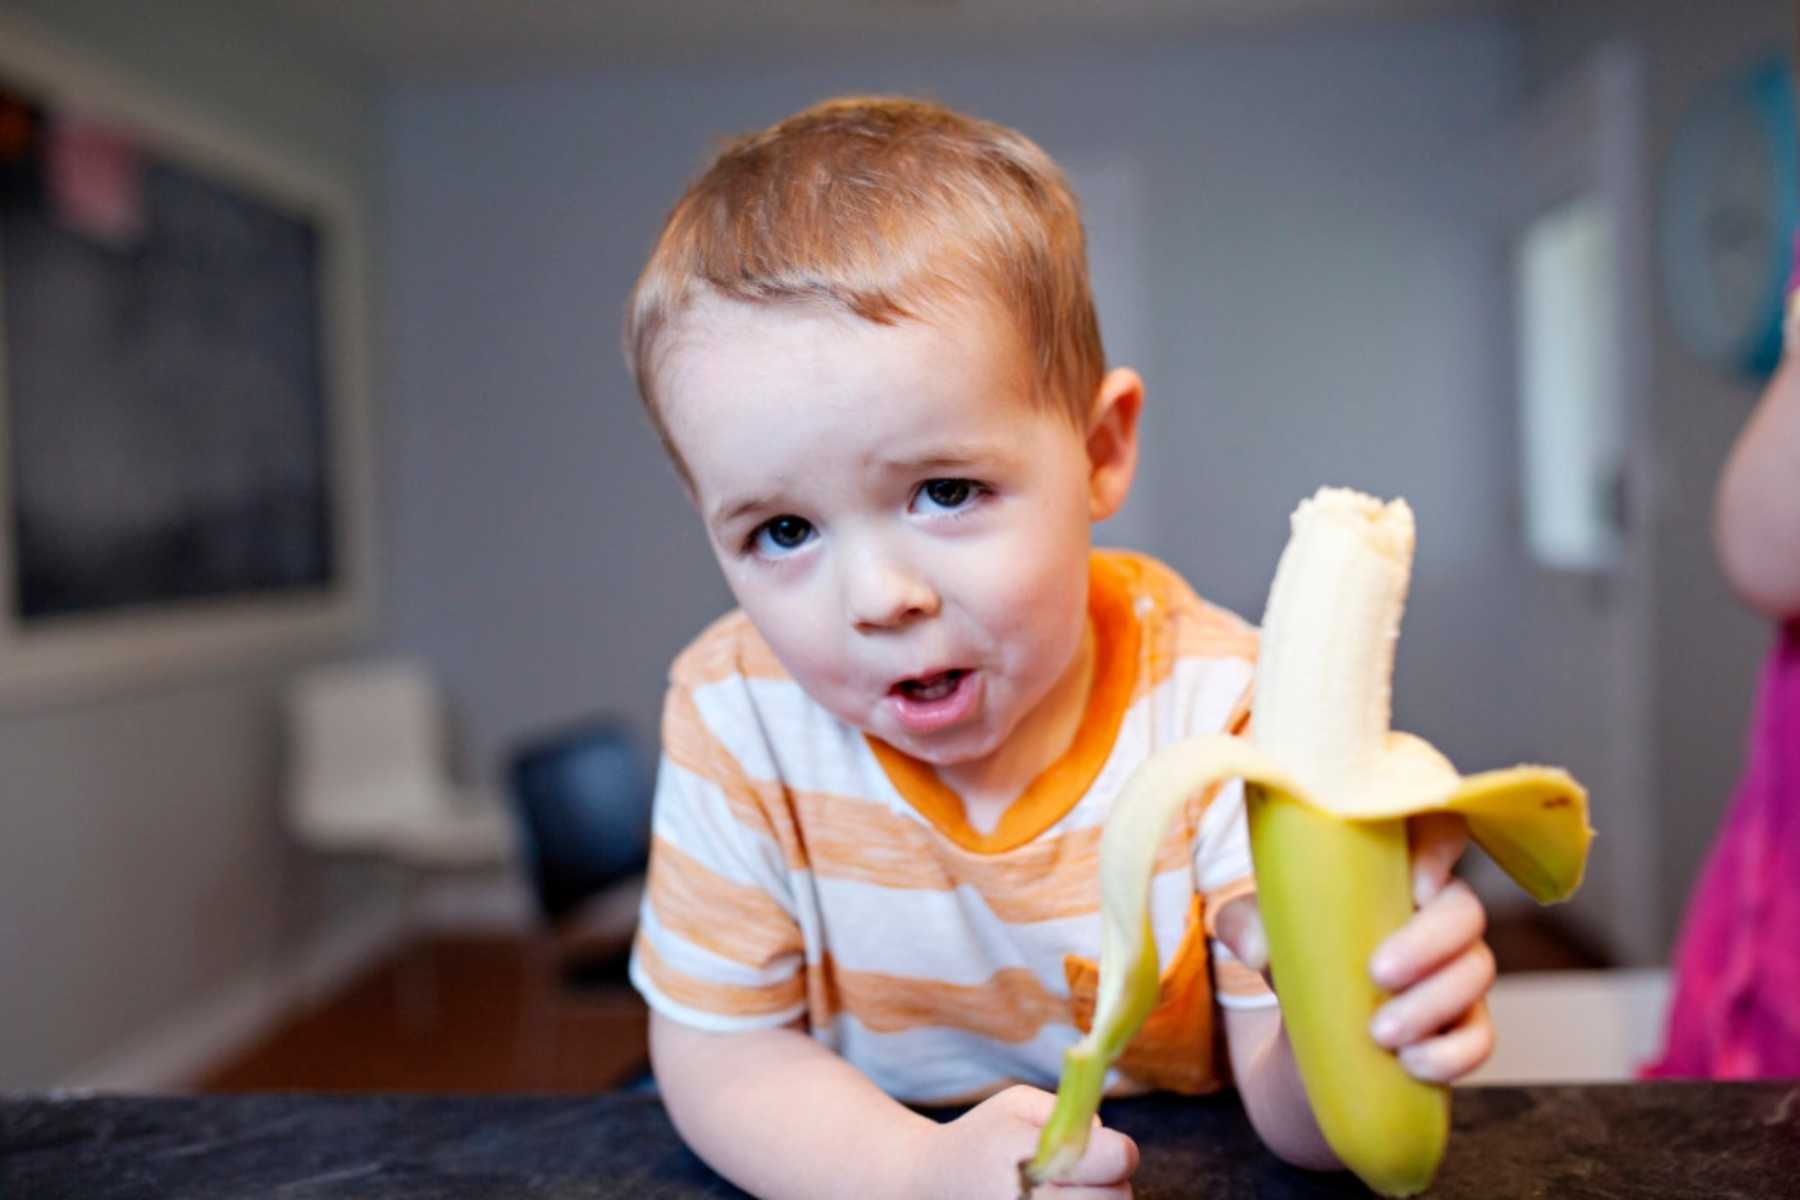 What To Feed a Toddler With Diarrhea | Mom.com